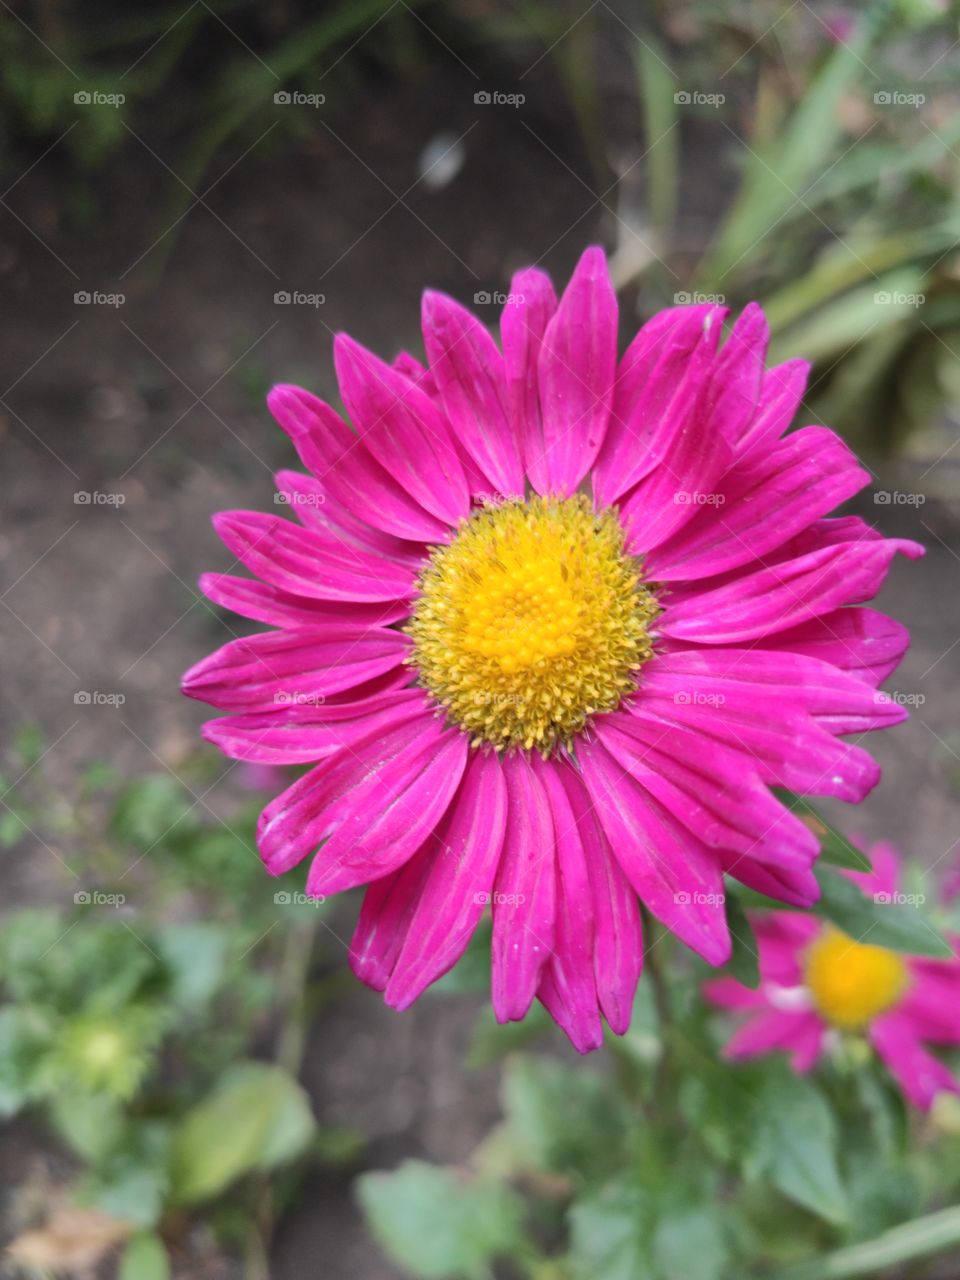 Flowers in the park with a blurred background in the background